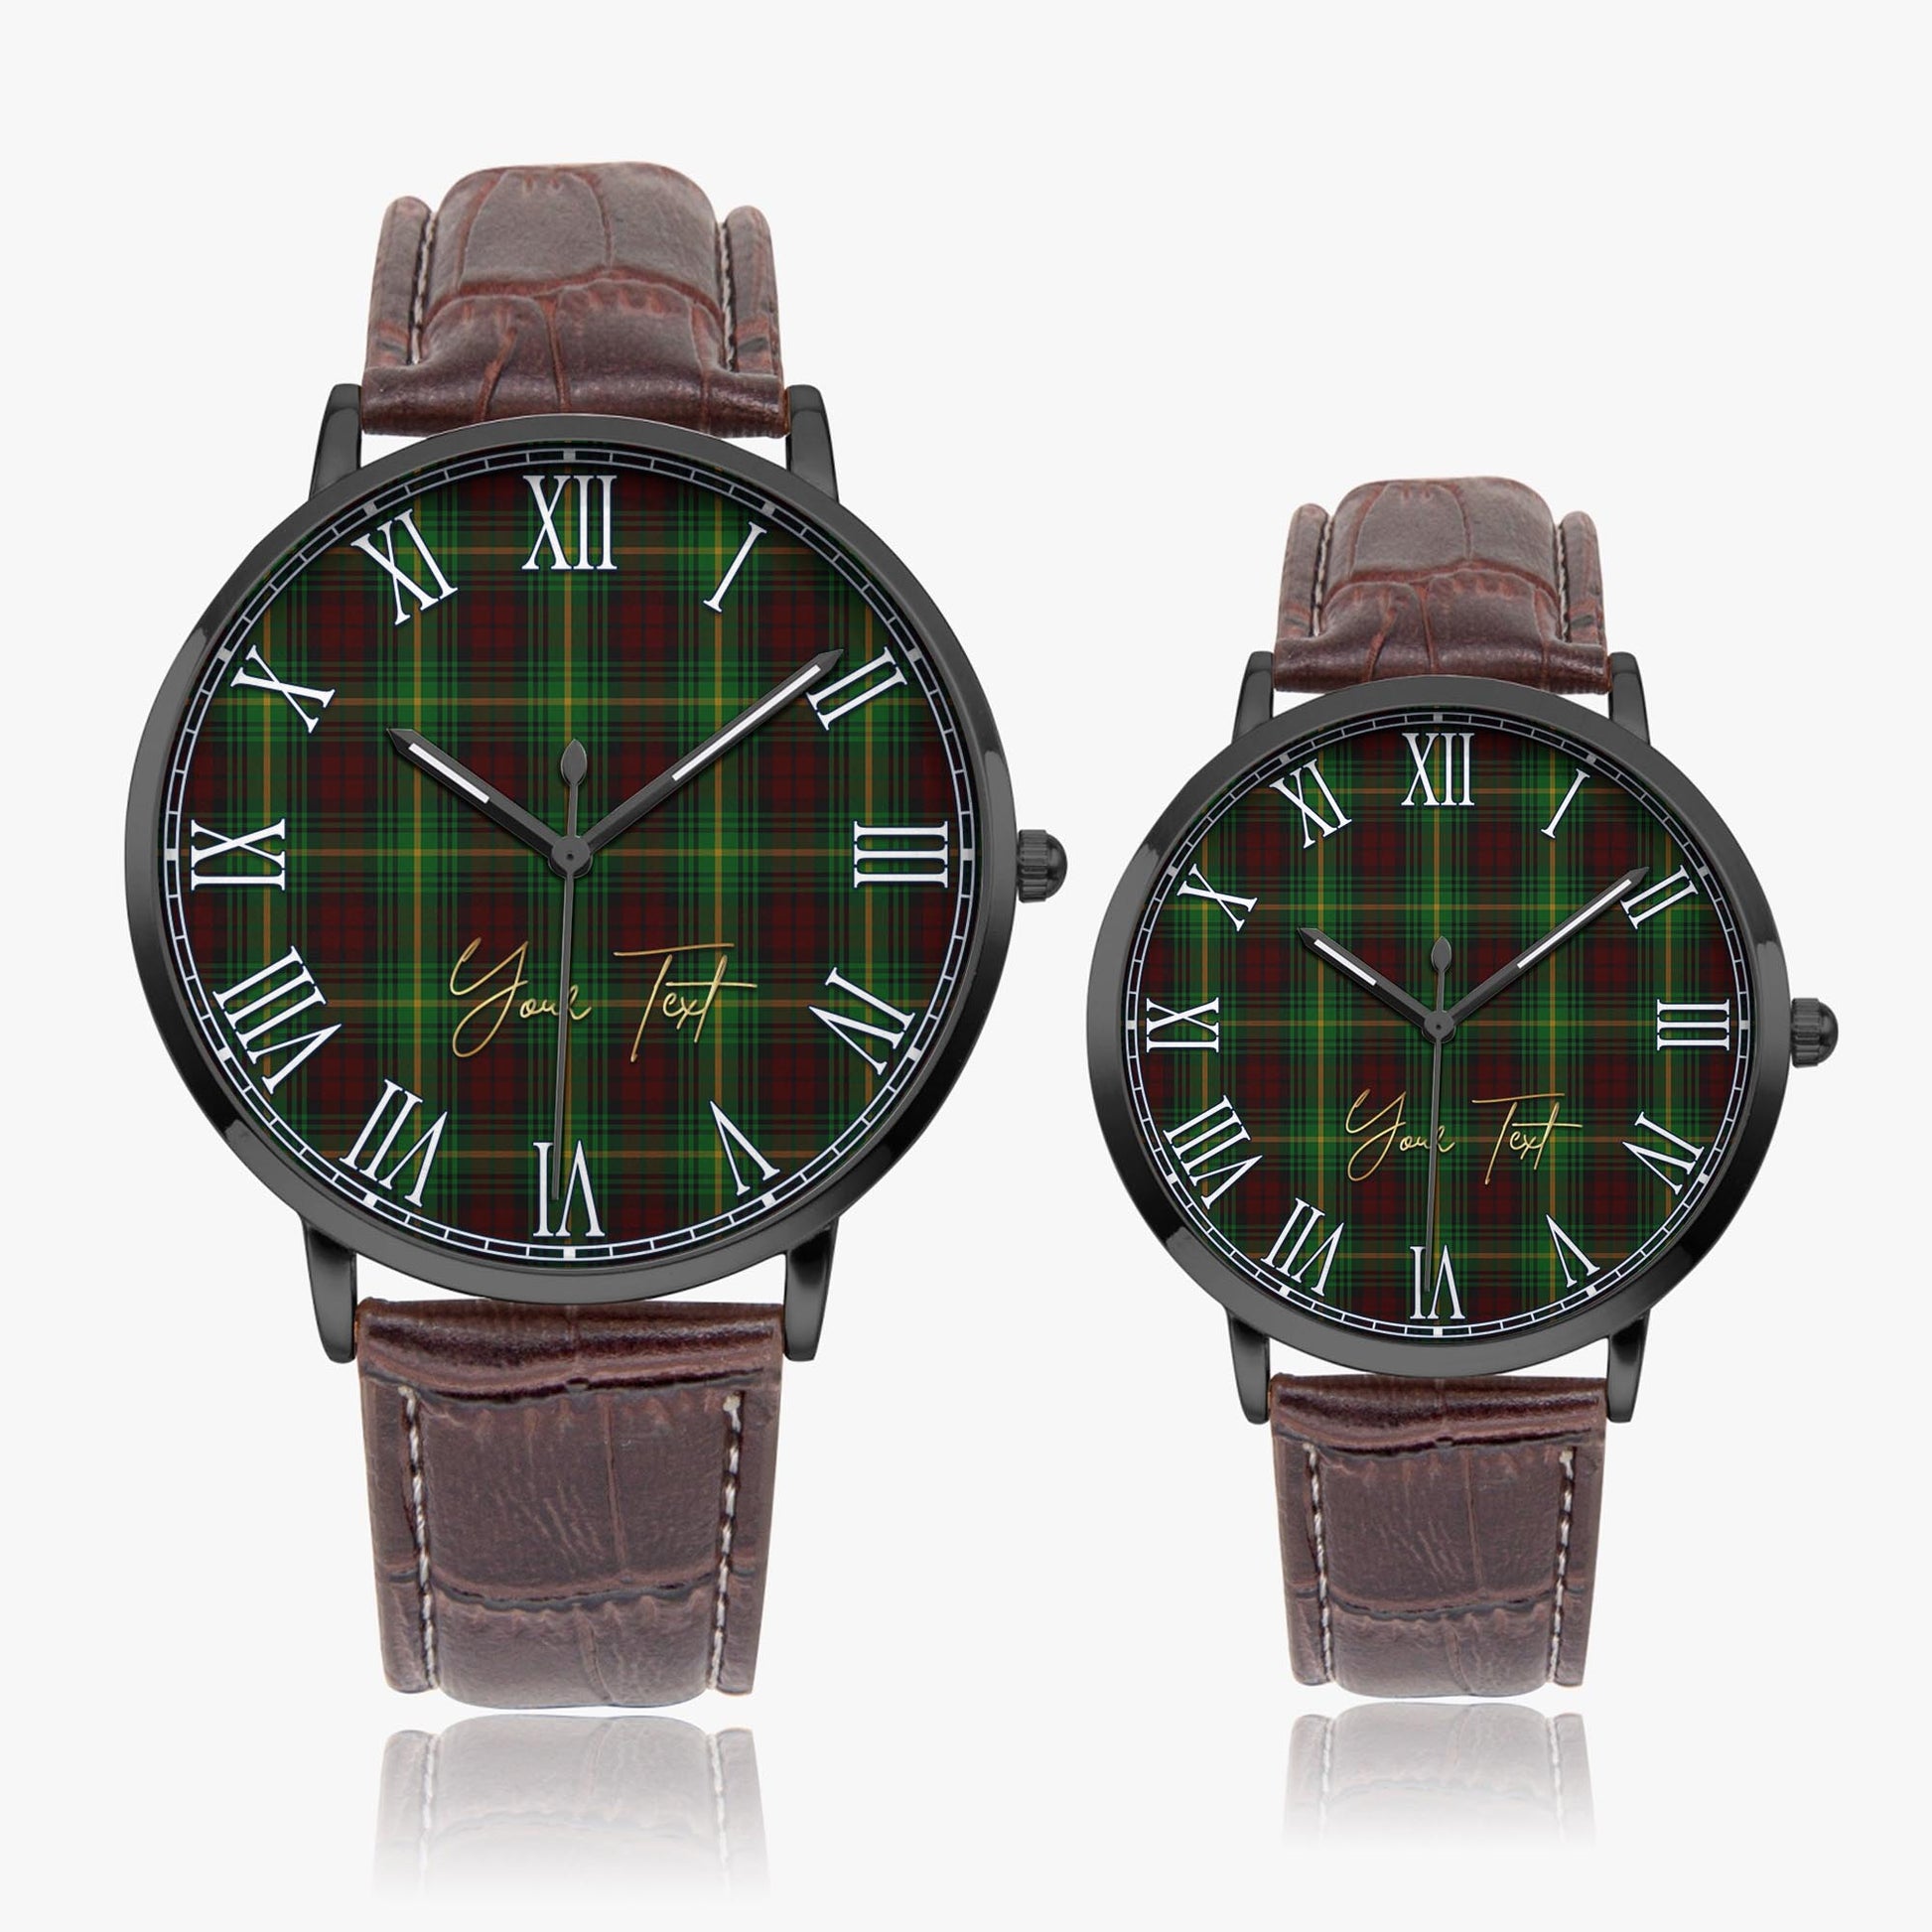 Martin Tartan Personalized Your Text Leather Trap Quartz Watch Ultra Thin Black Case With Brown Leather Strap - Tartanvibesclothing